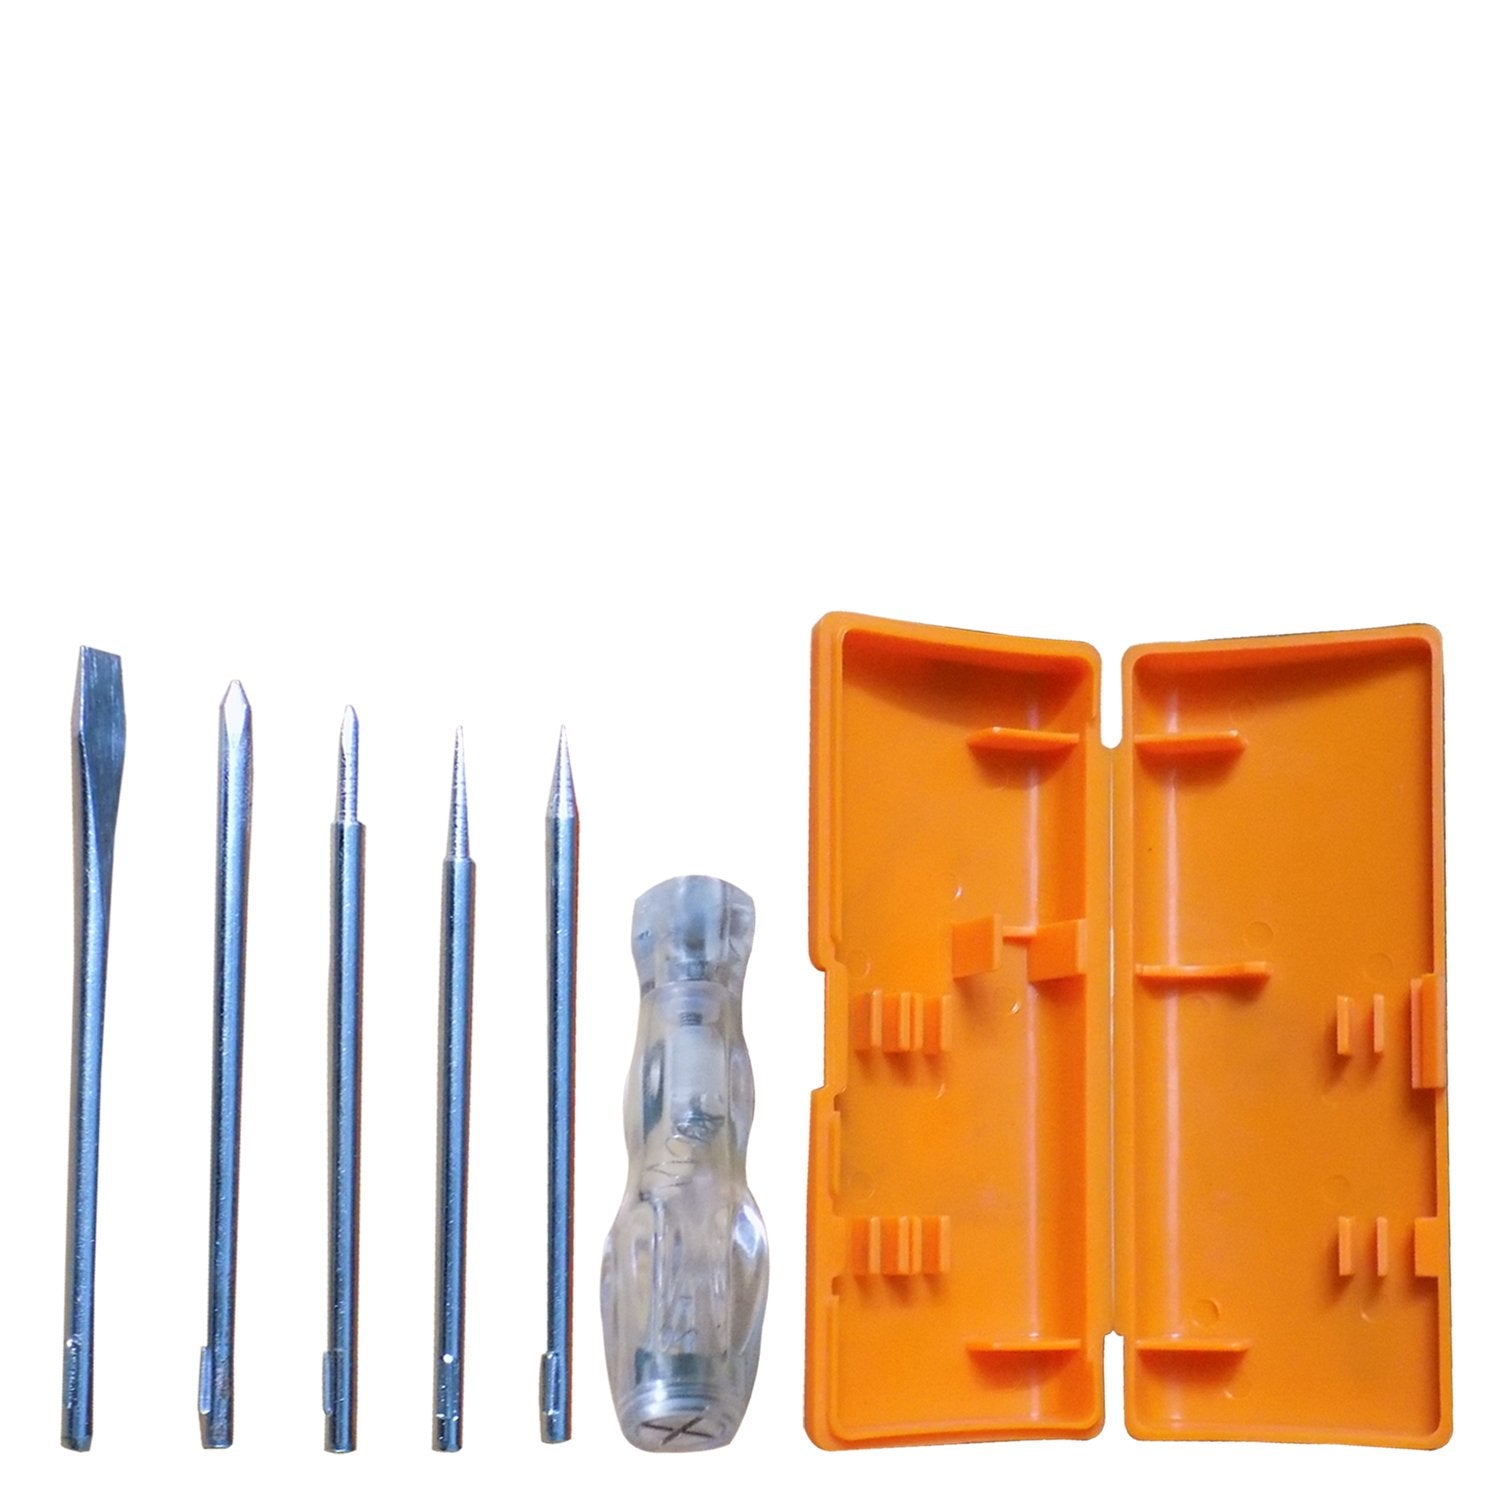 0431 Stainless Steel 5 In 1 Screwdriver Kit - SkyShopy